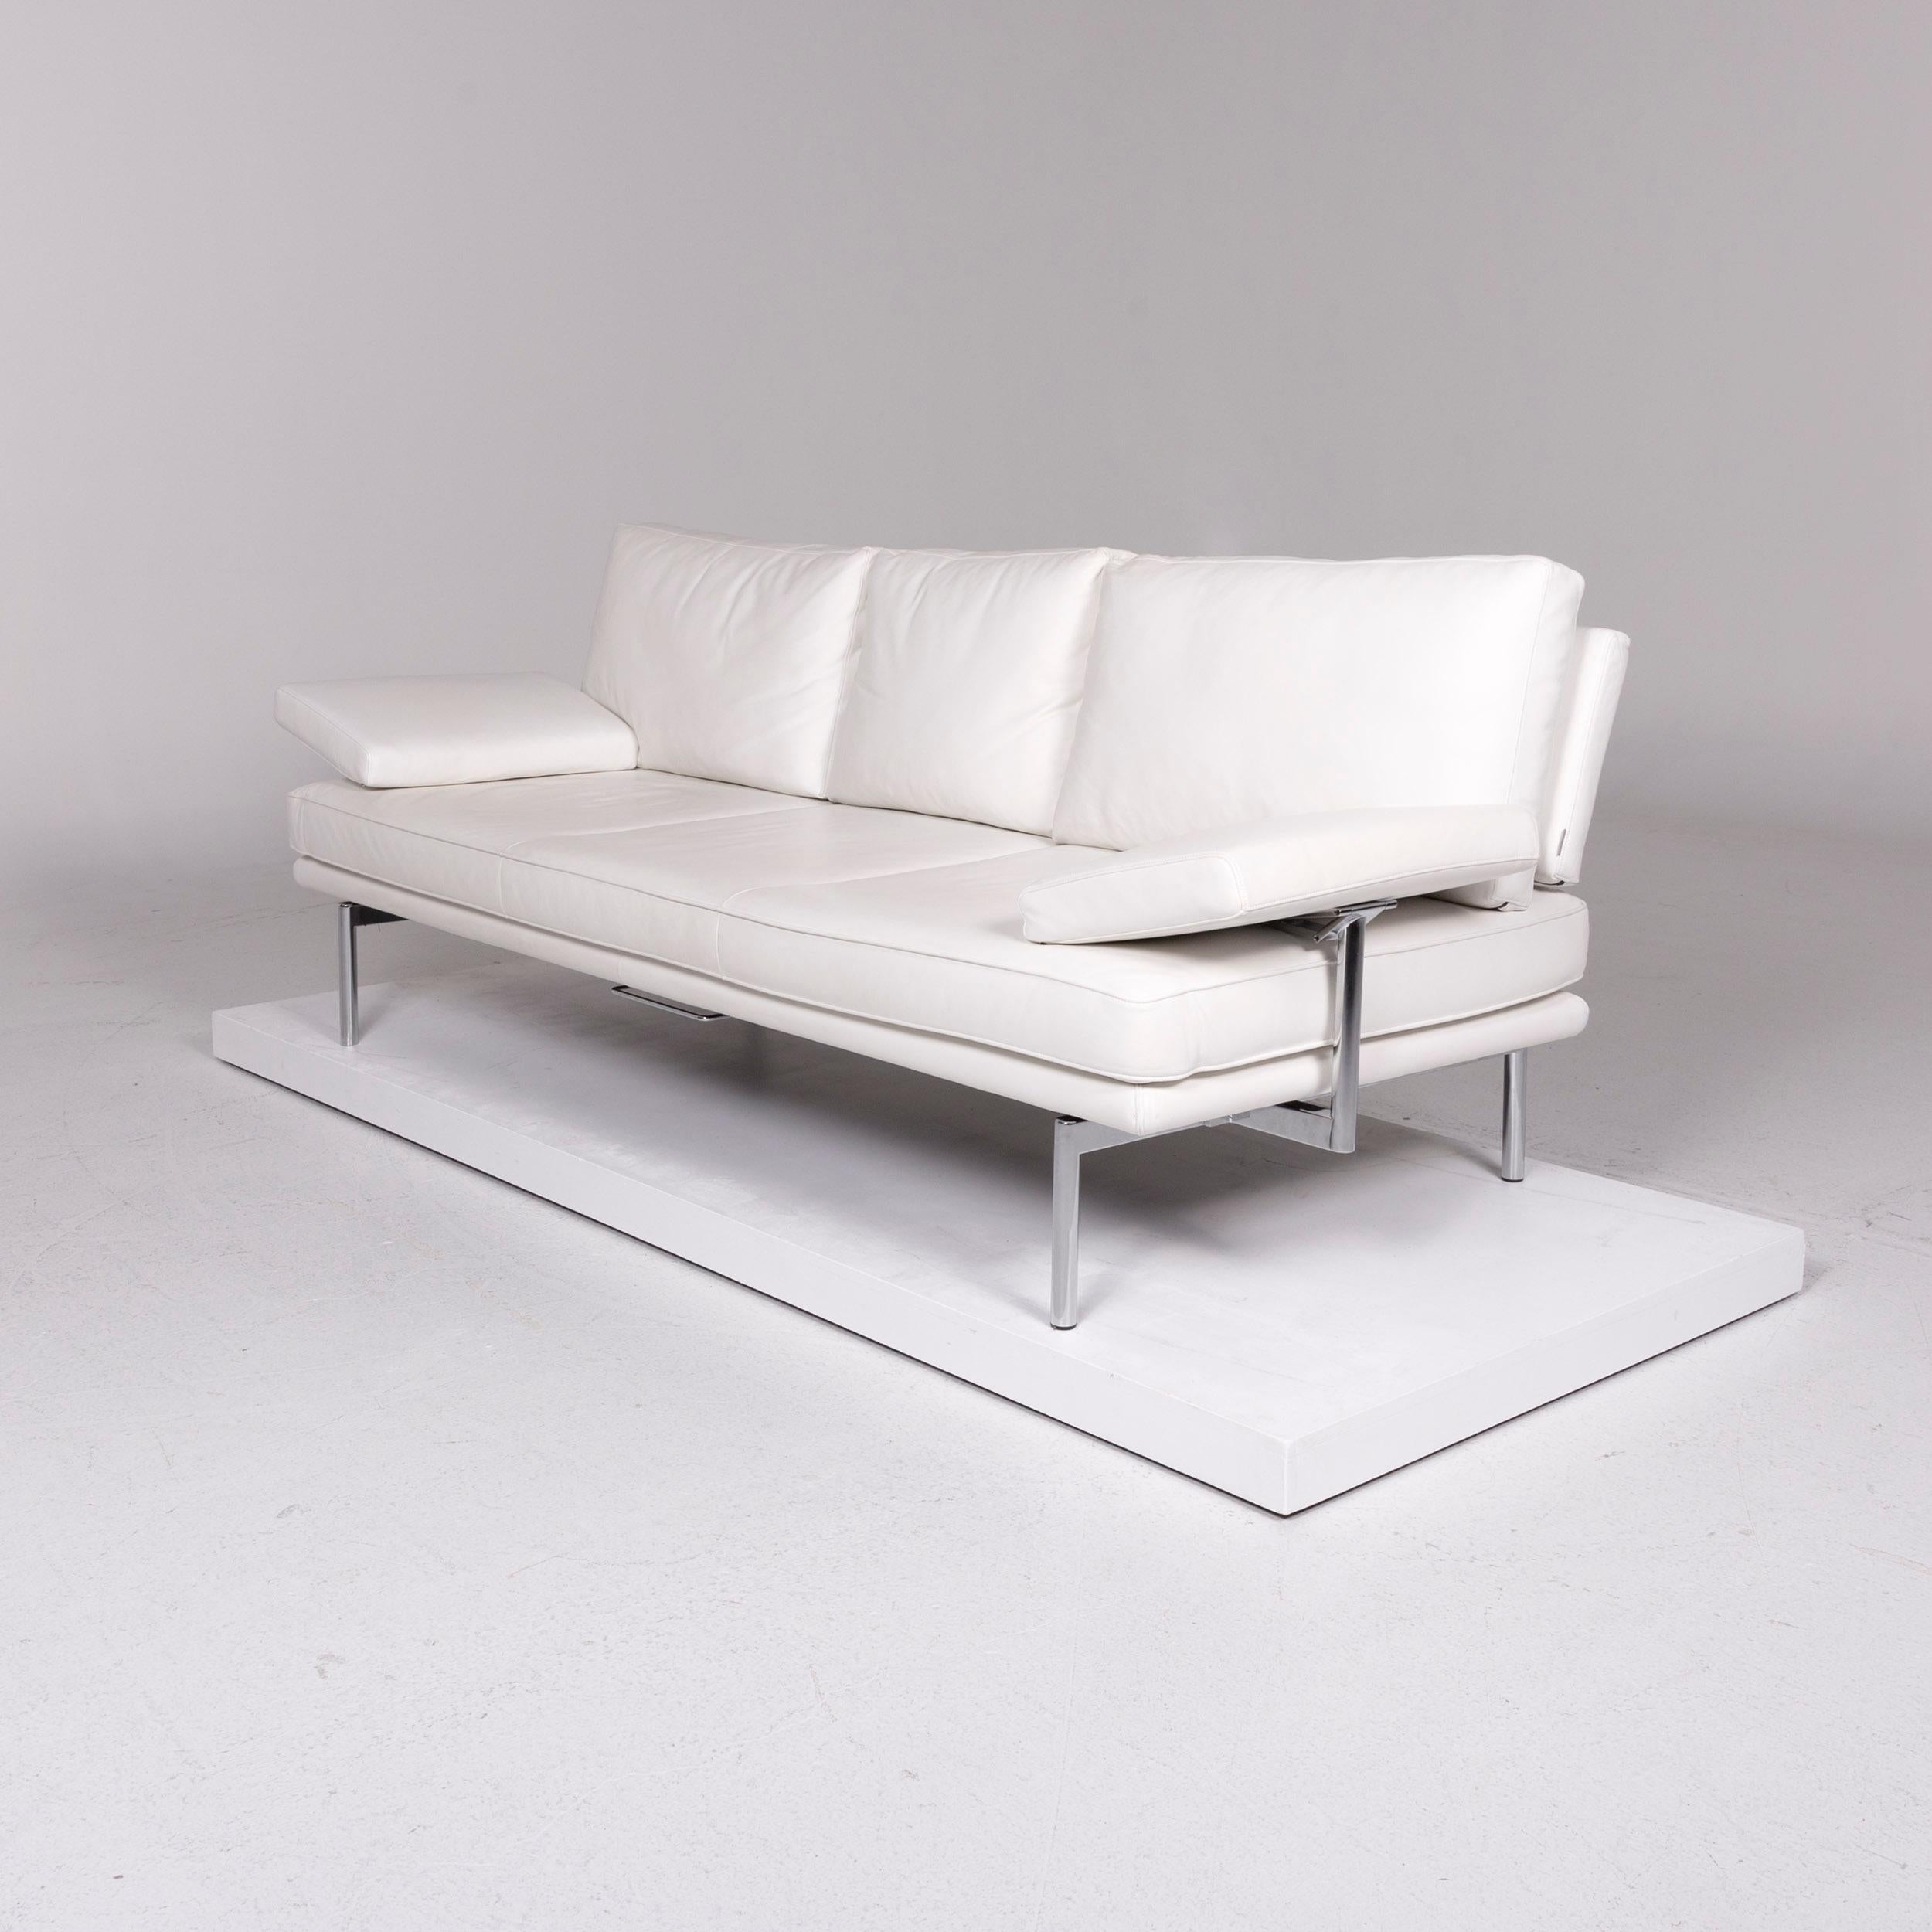 Walter Knoll Living Platform Leather Sofa White Three-Seat Function Couch In Good Condition For Sale In Cologne, DE